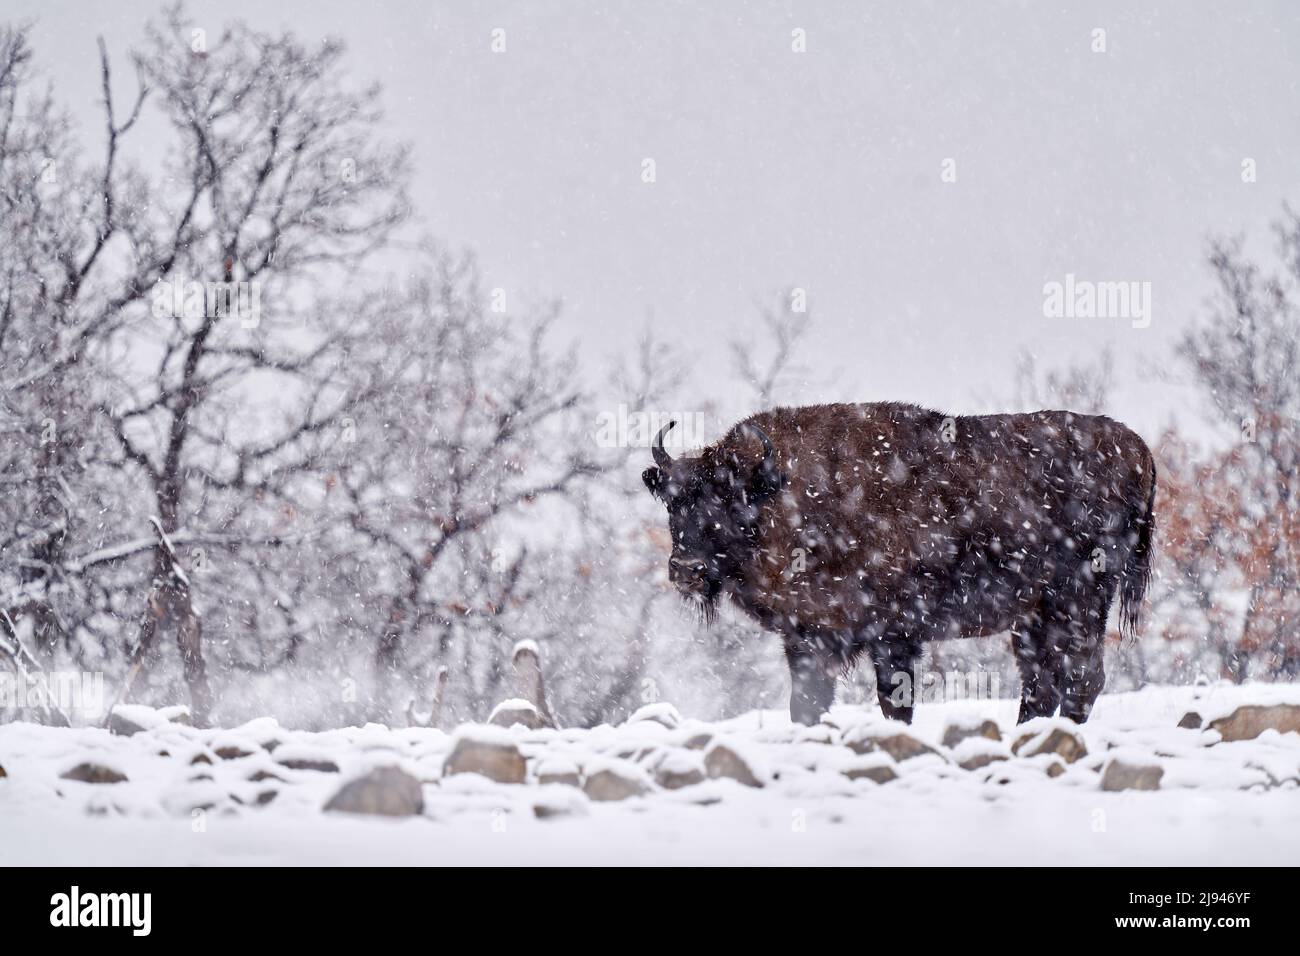 Bison in the winter snow forest, misty scene with big brown animal in nature habitat, cold weather, Studen Kladenec, Eastern Rhodopes, Bulgaria. Snow Stock Photo